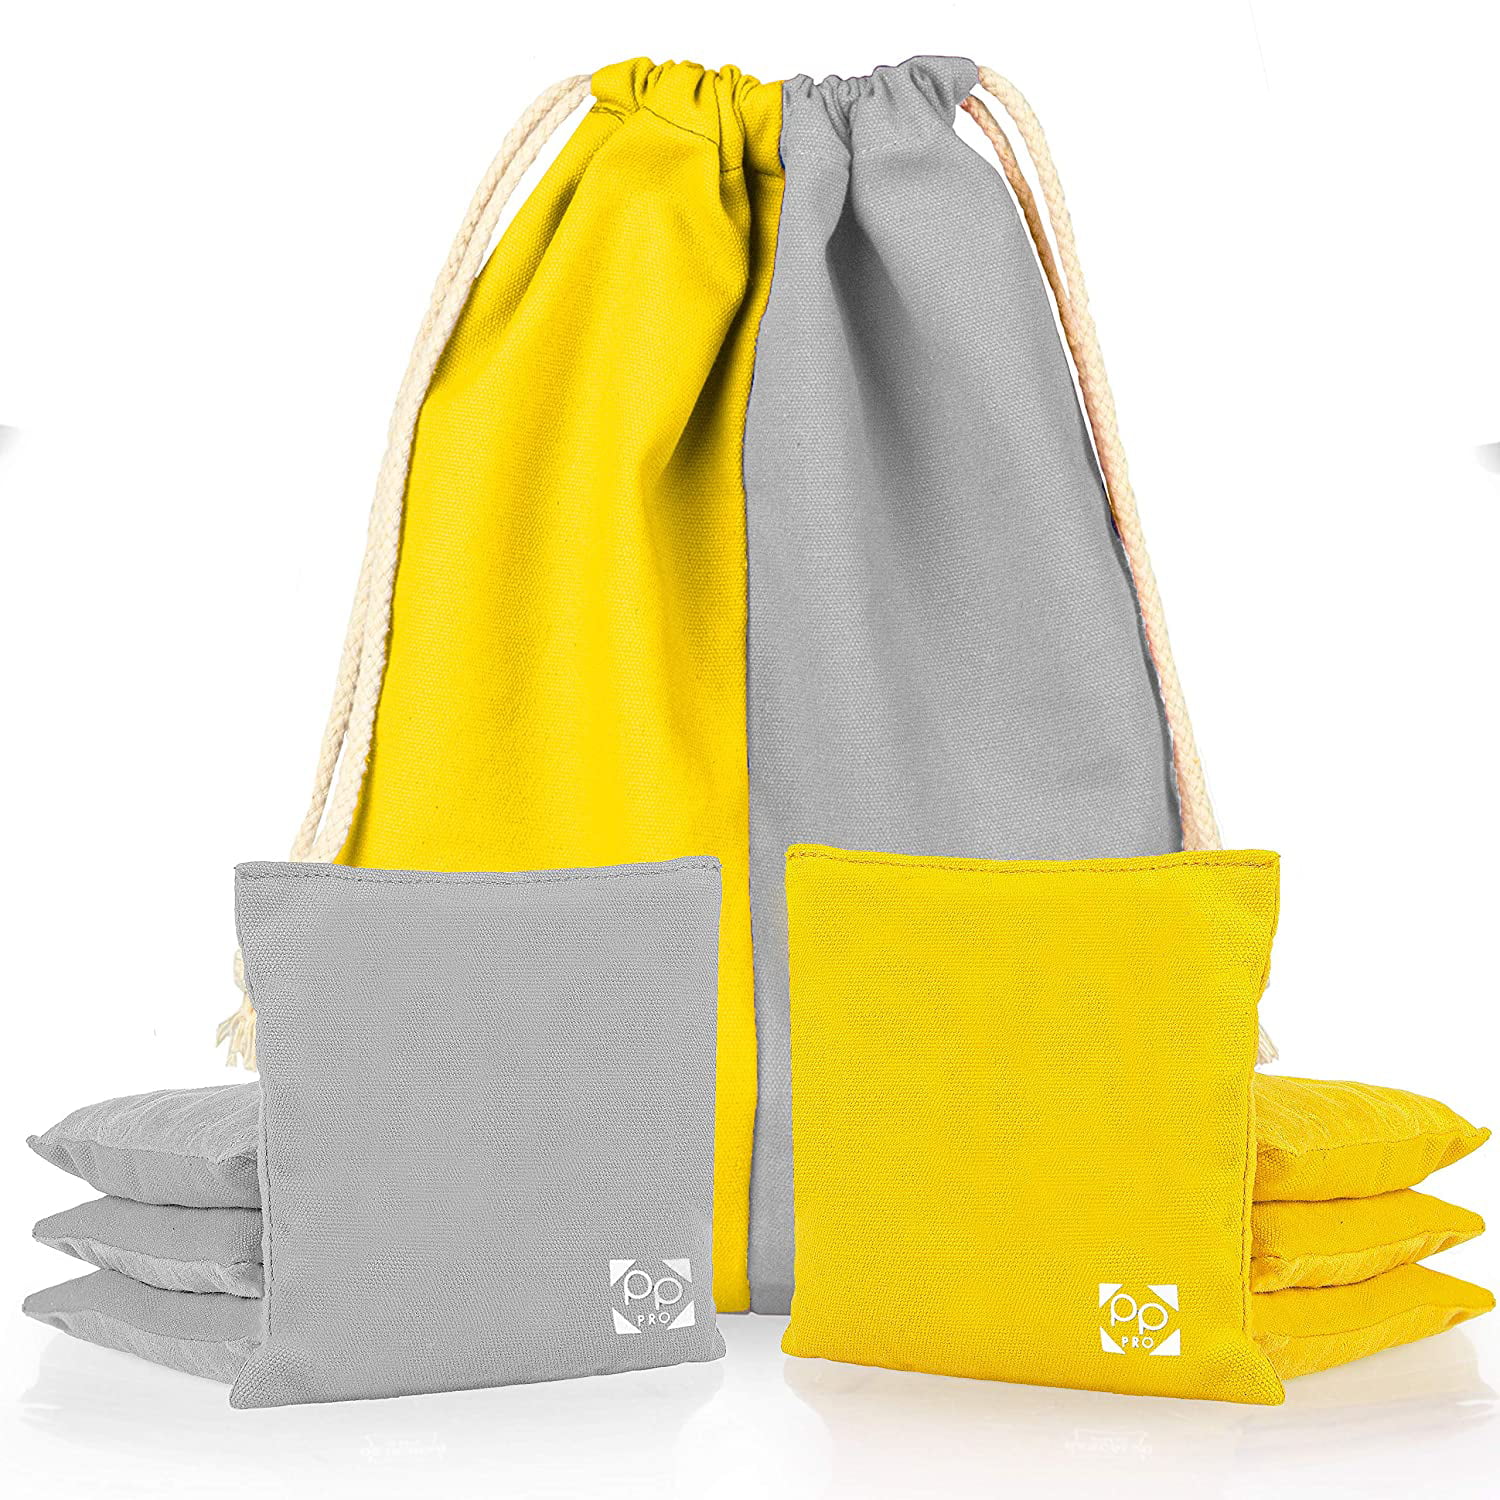 Set of 8 WEATHER CORNHOLE BAGS PICK 2 COLORS WITH DRAWSTRING CARRYING TOTE!!! 